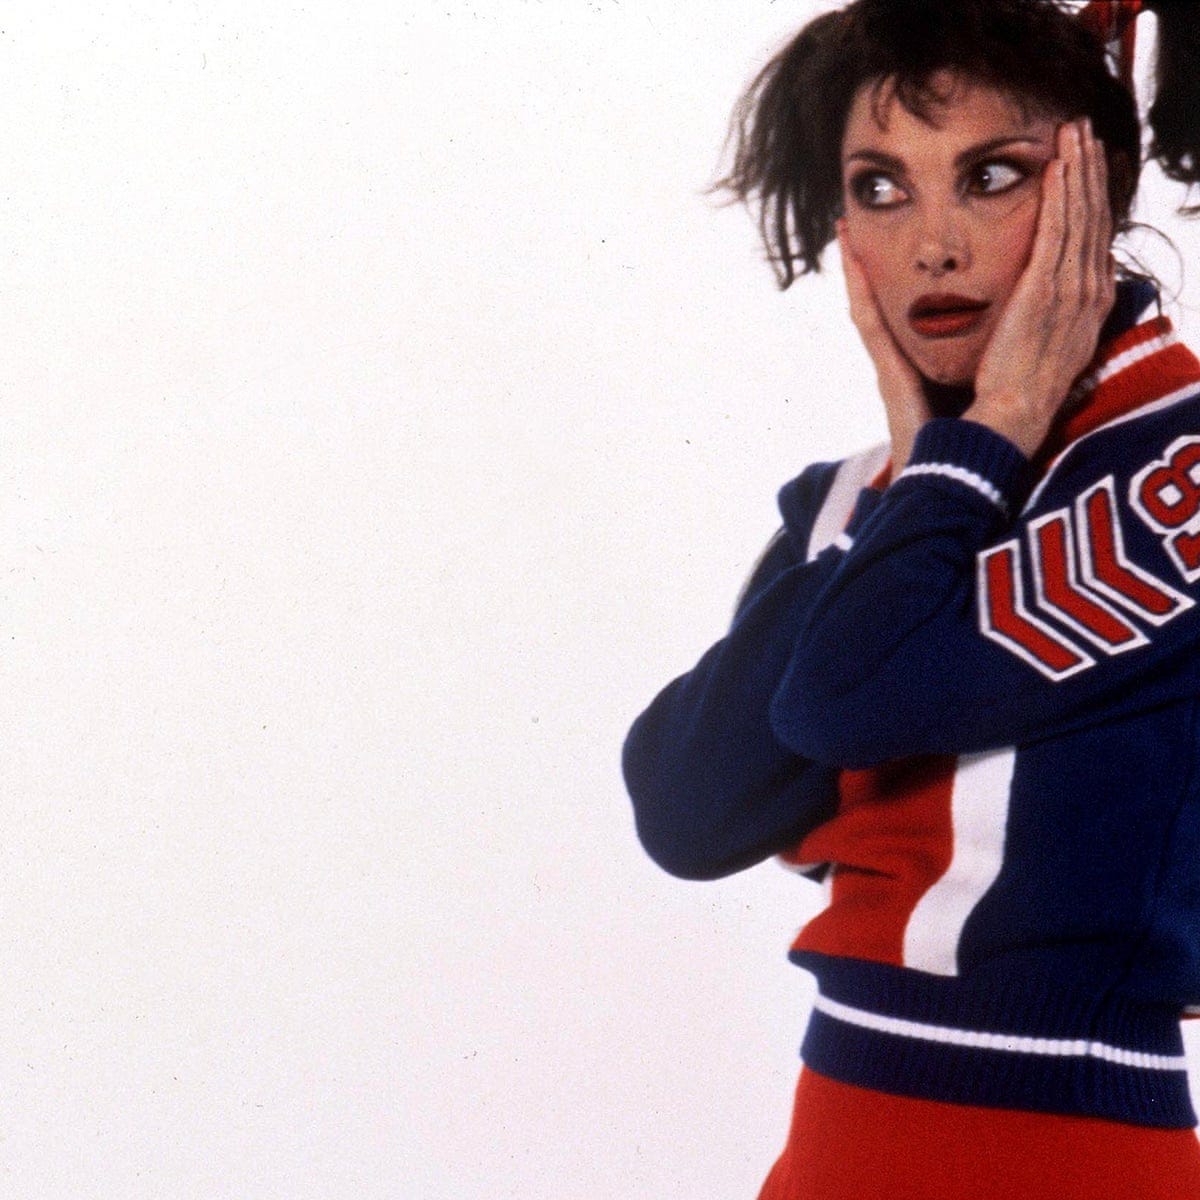 Pay Mickey! Why Toni Basil is suing almost everyone | Pop and rock | The  Guardian